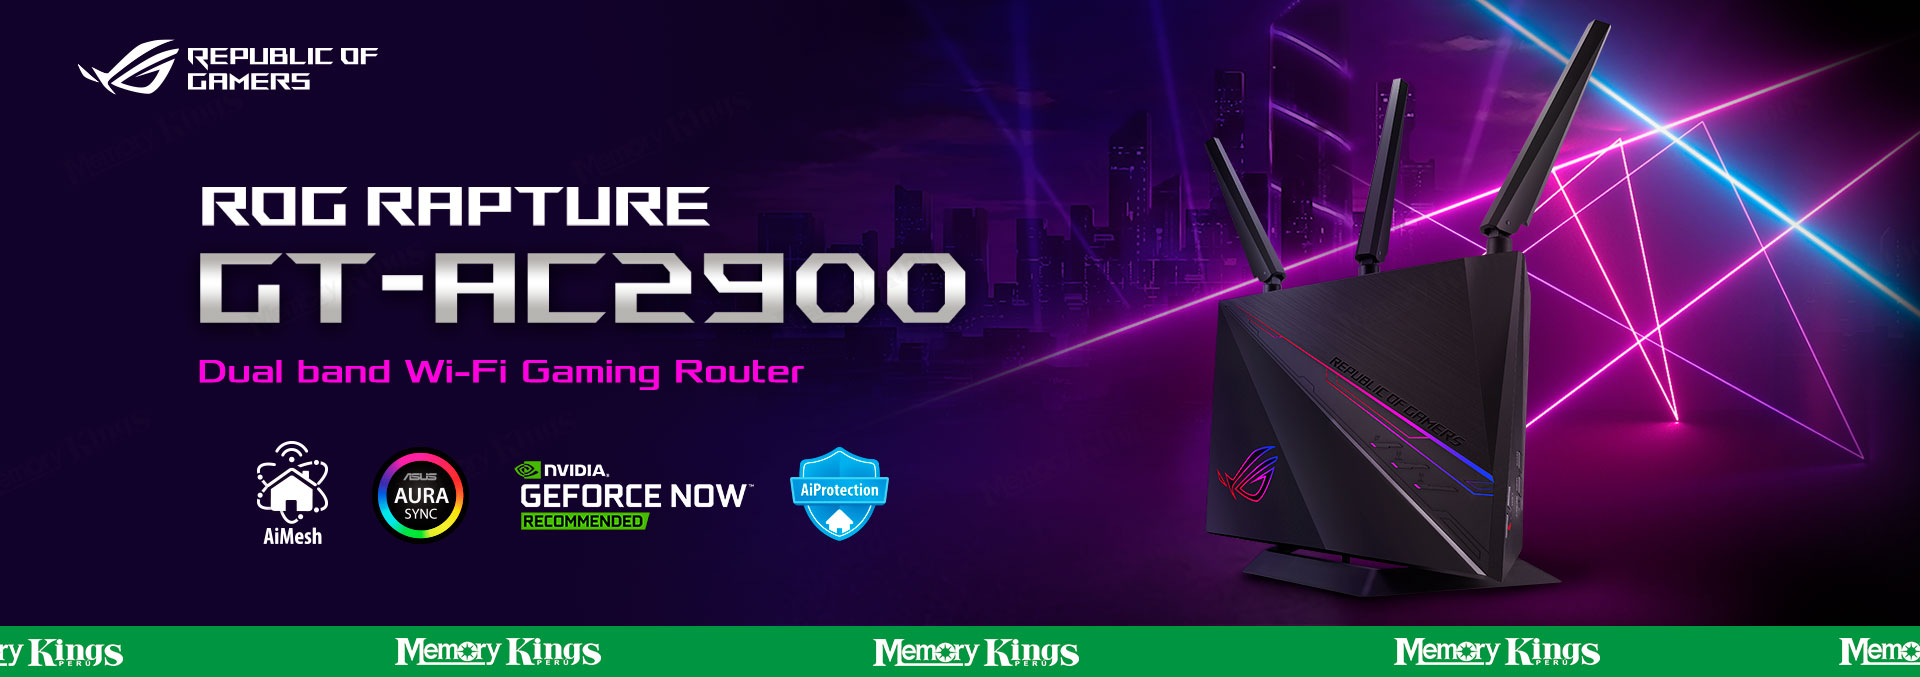 ROUTER ASUS ROG Rapture GT-AC2900 2BAND 3antenas